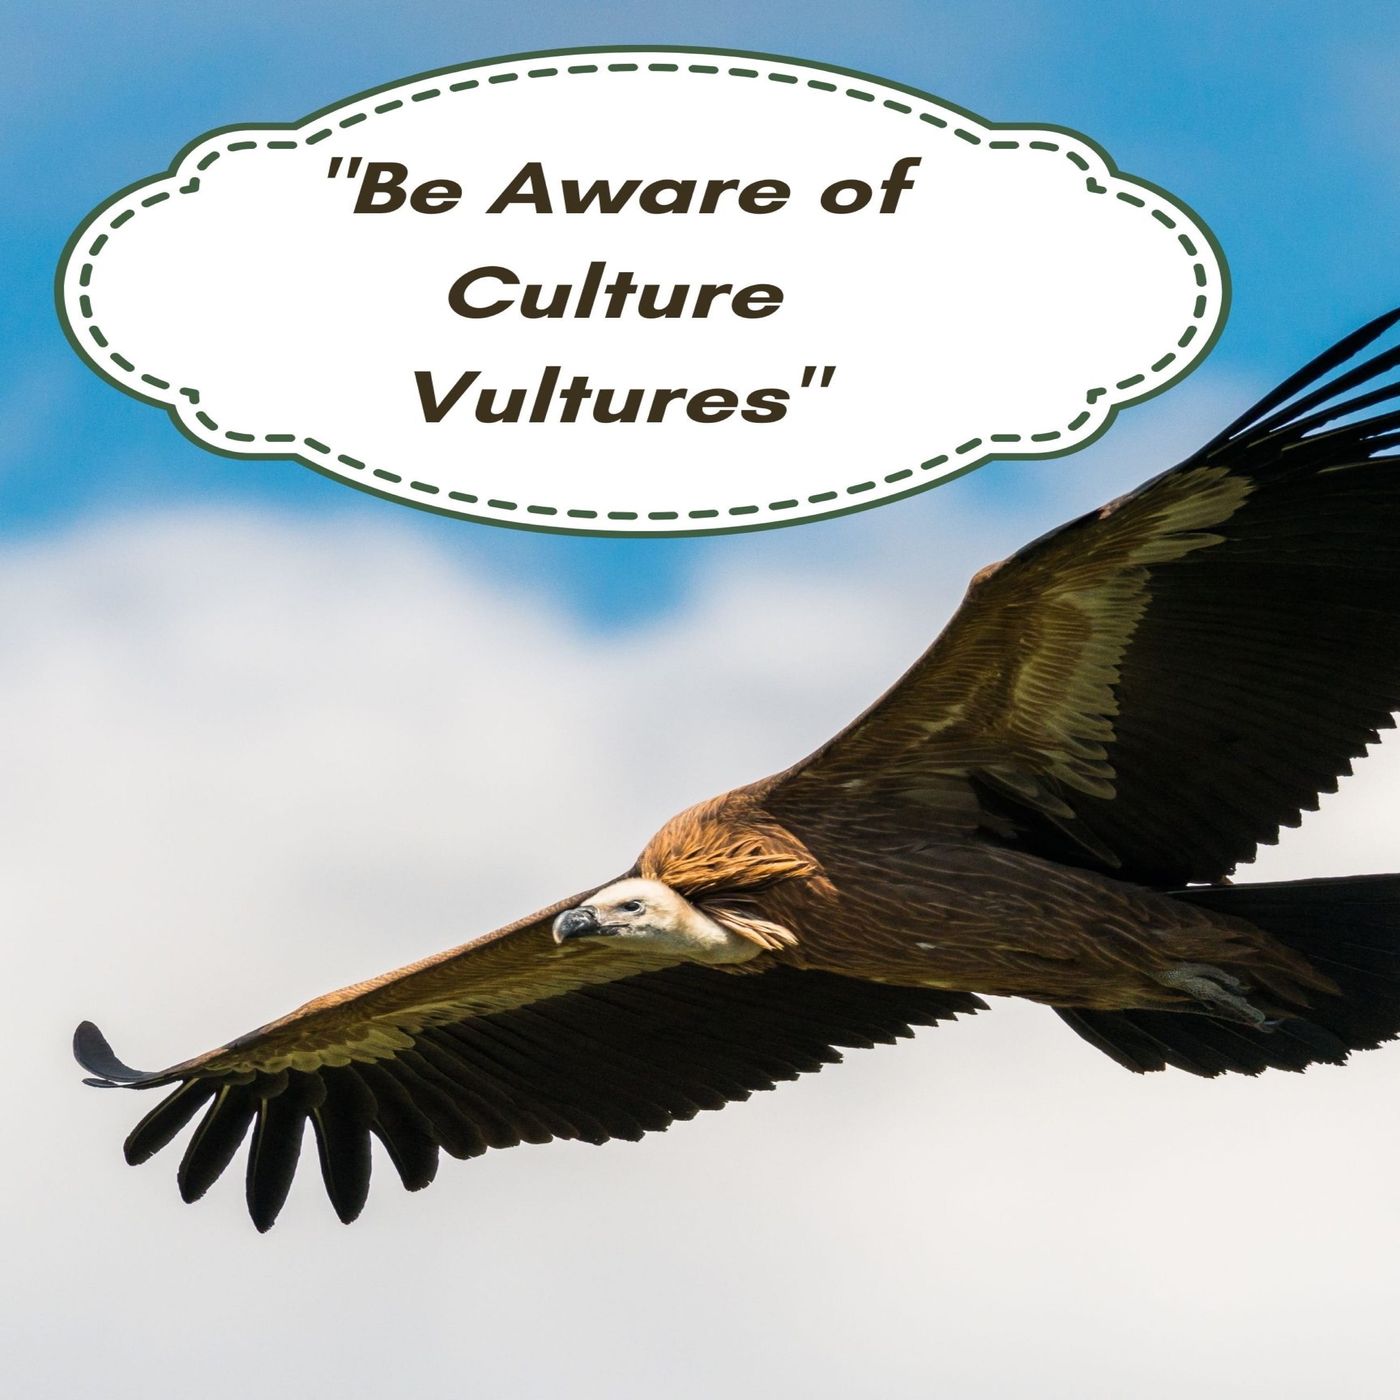 Ep. 39 - "Be Aware of Culture Vultures"